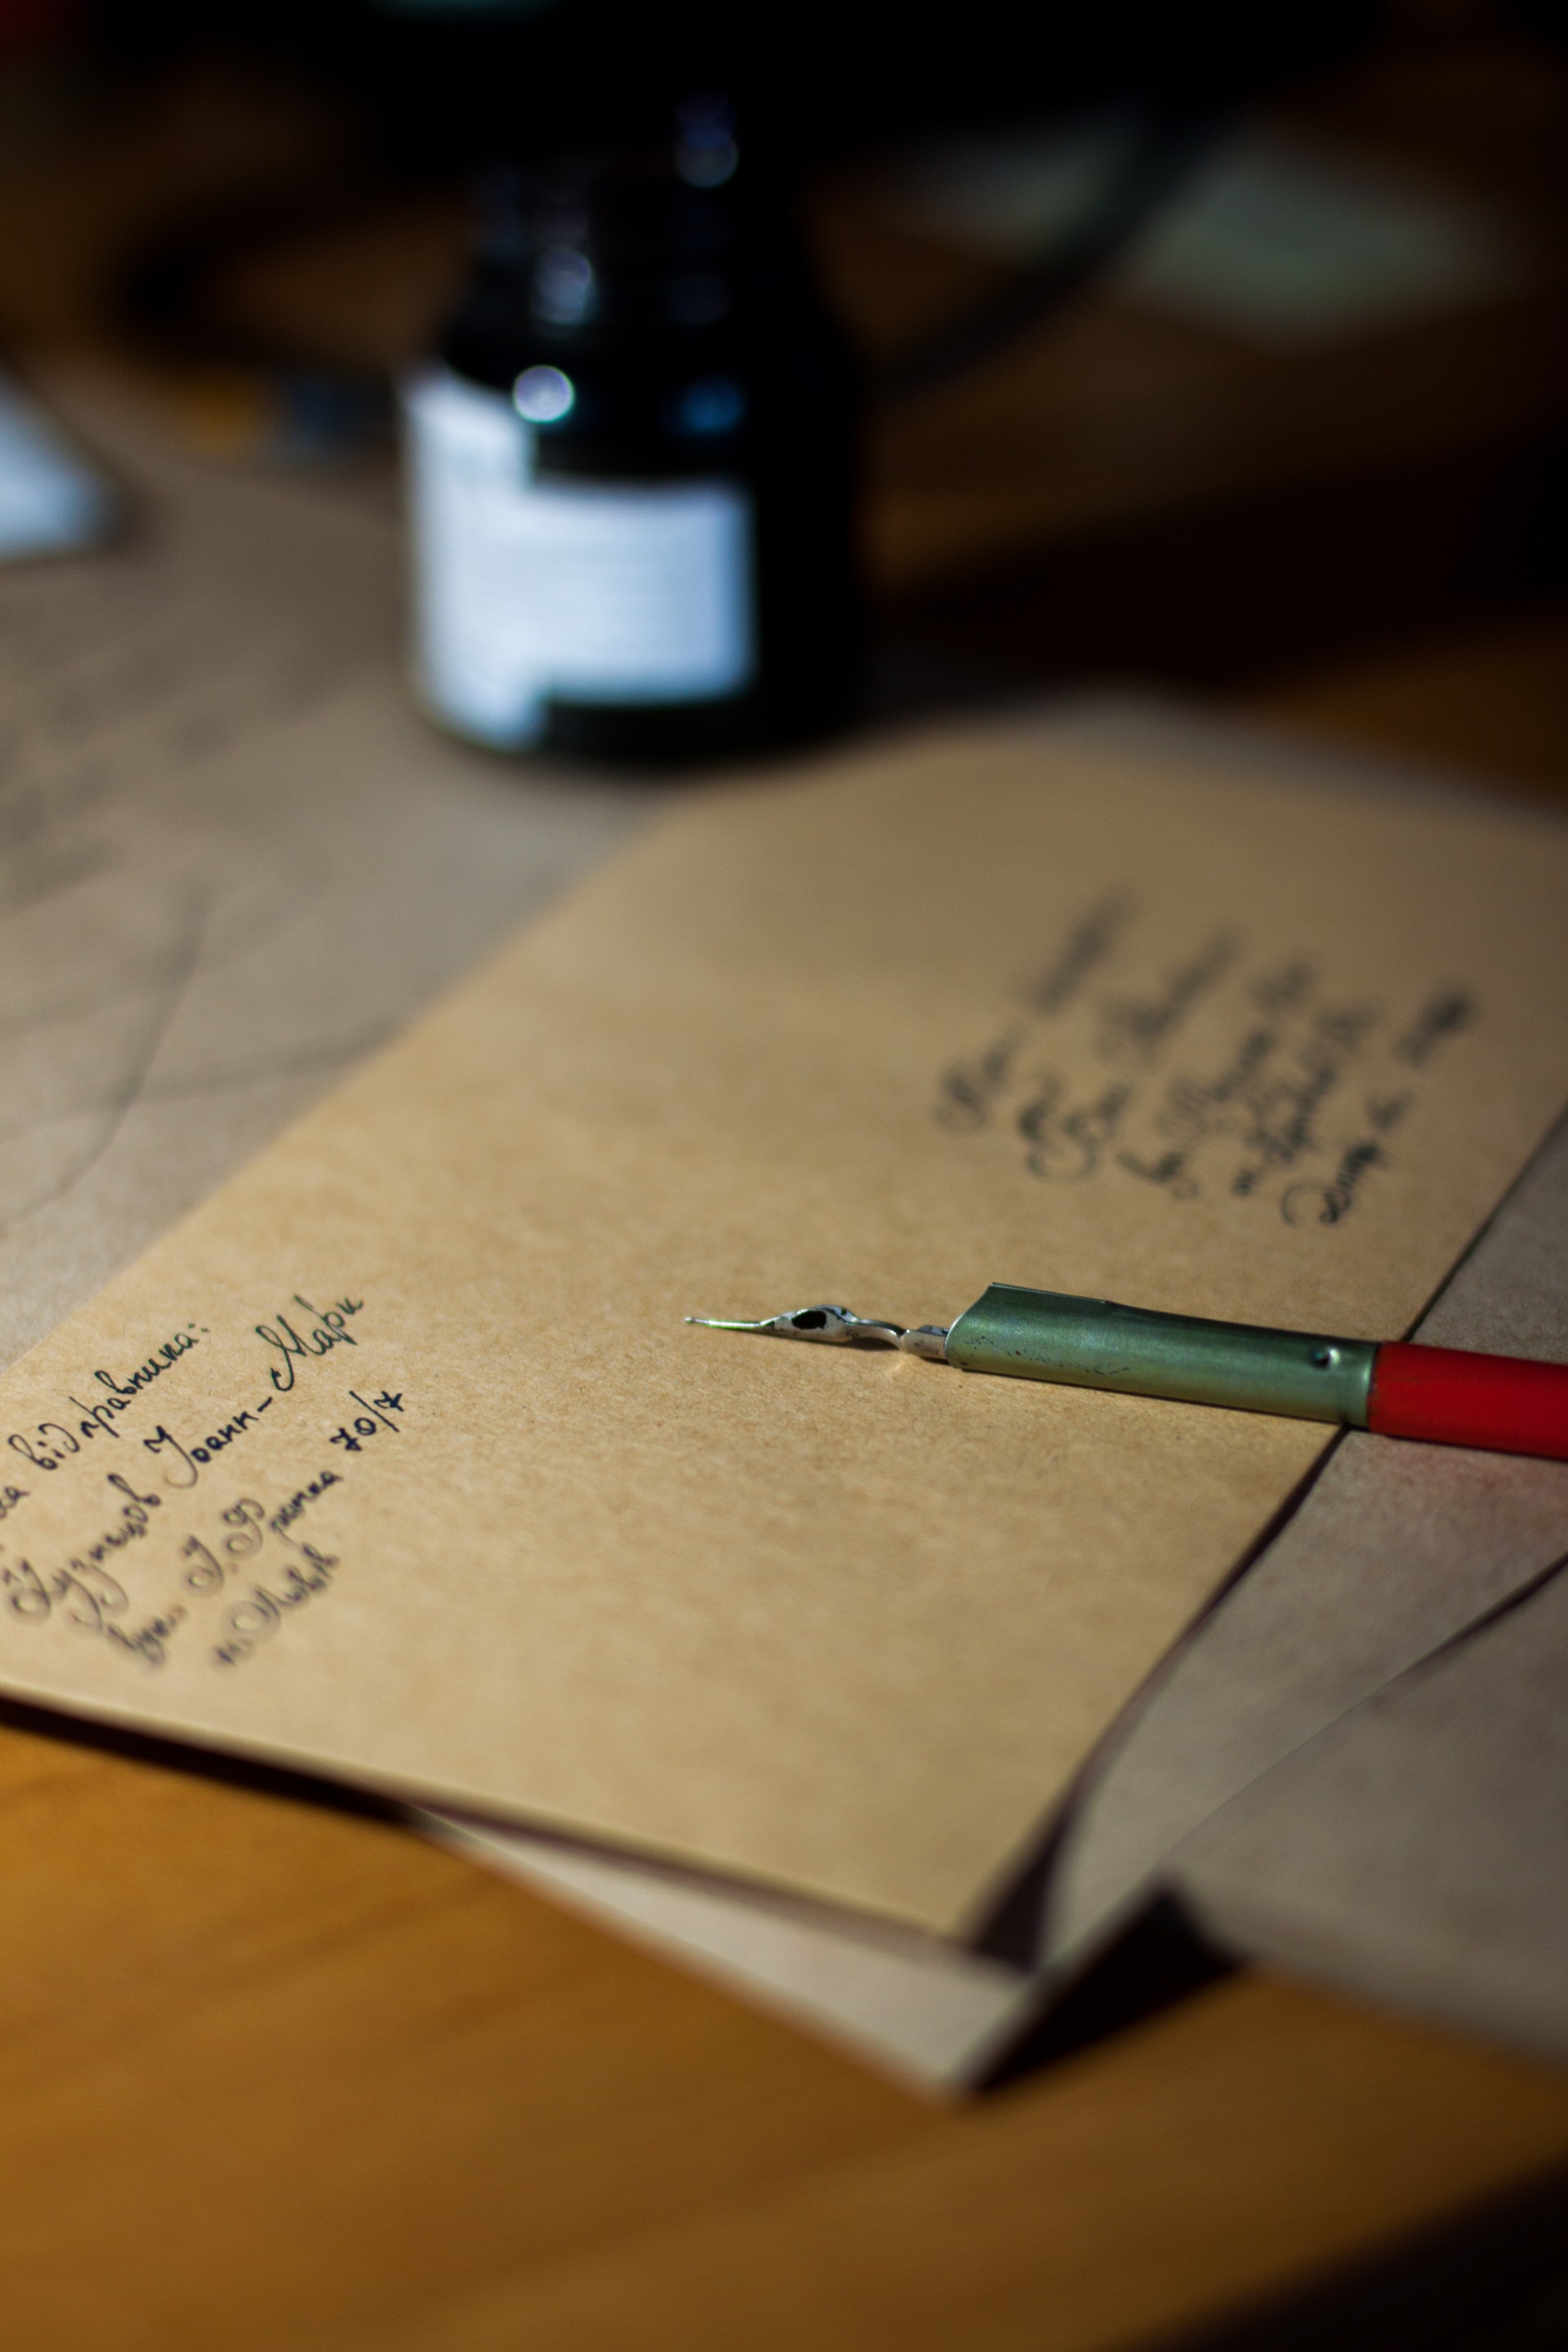 A fountain pen on a brown envelope | Source: Pexels